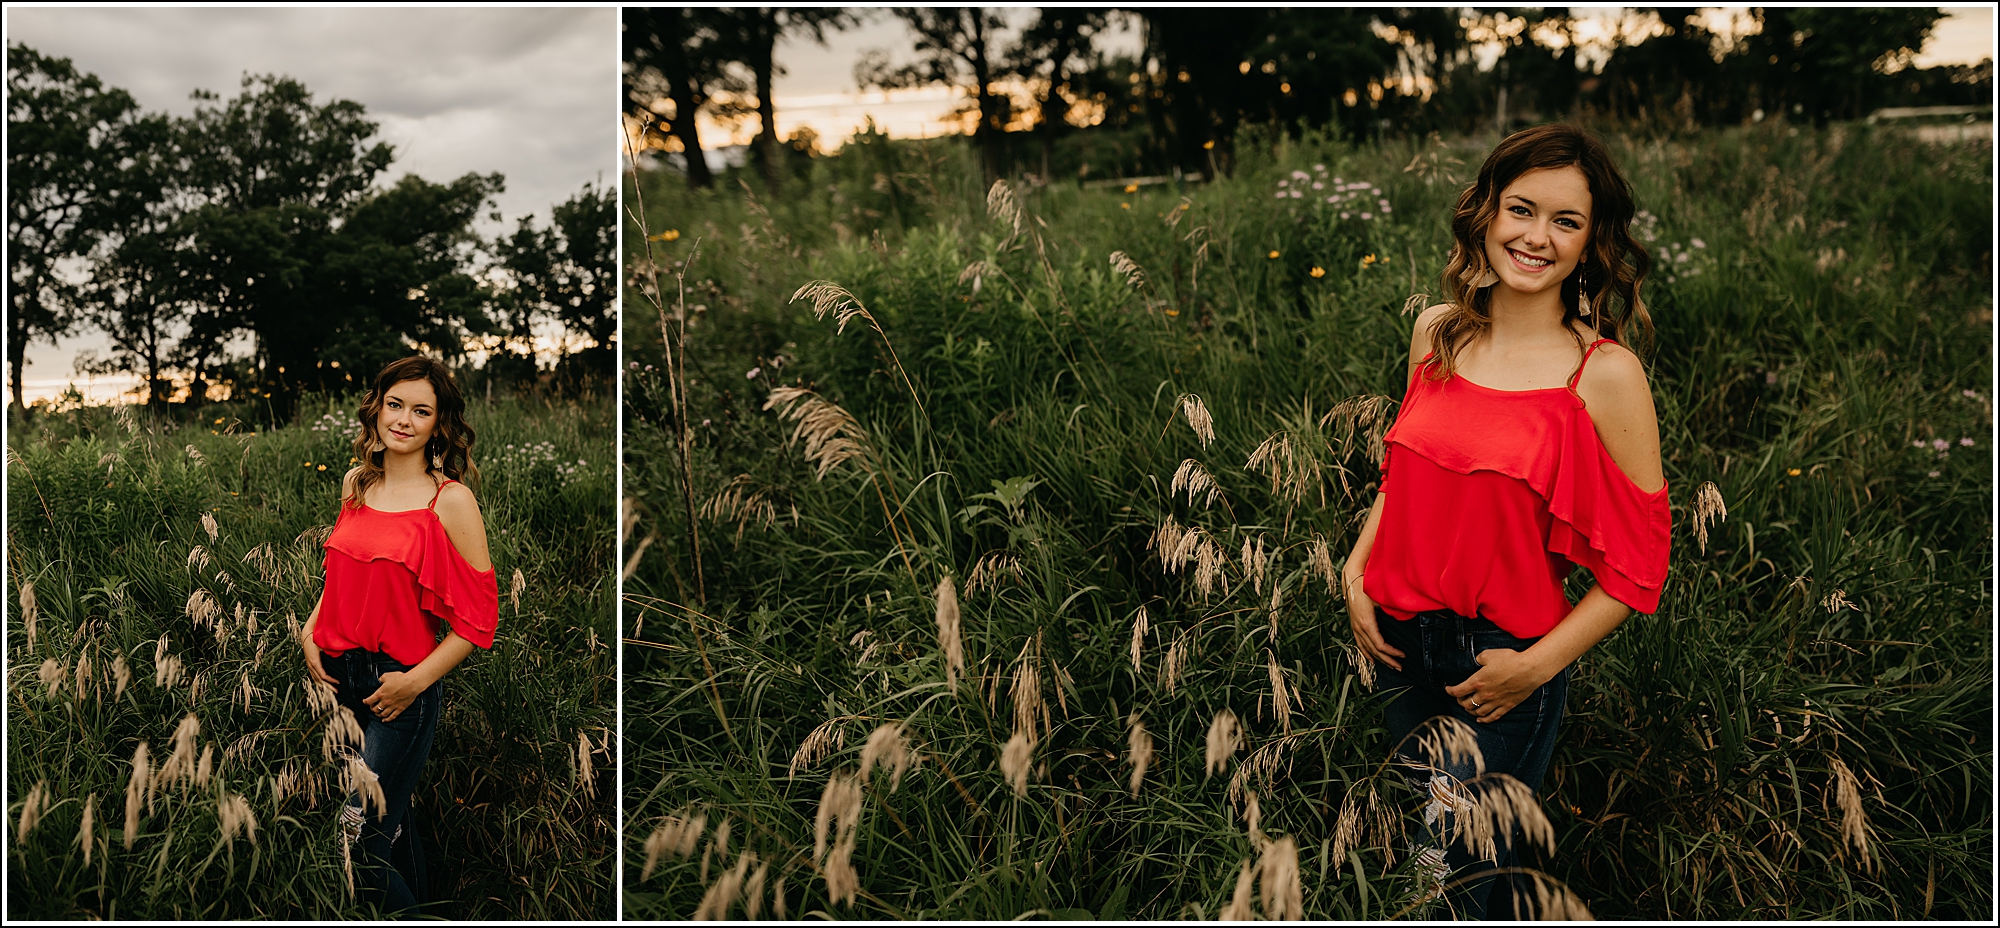 southwest wi senior photographer girl senior portrait in field of tall grass sunset trees bright red top